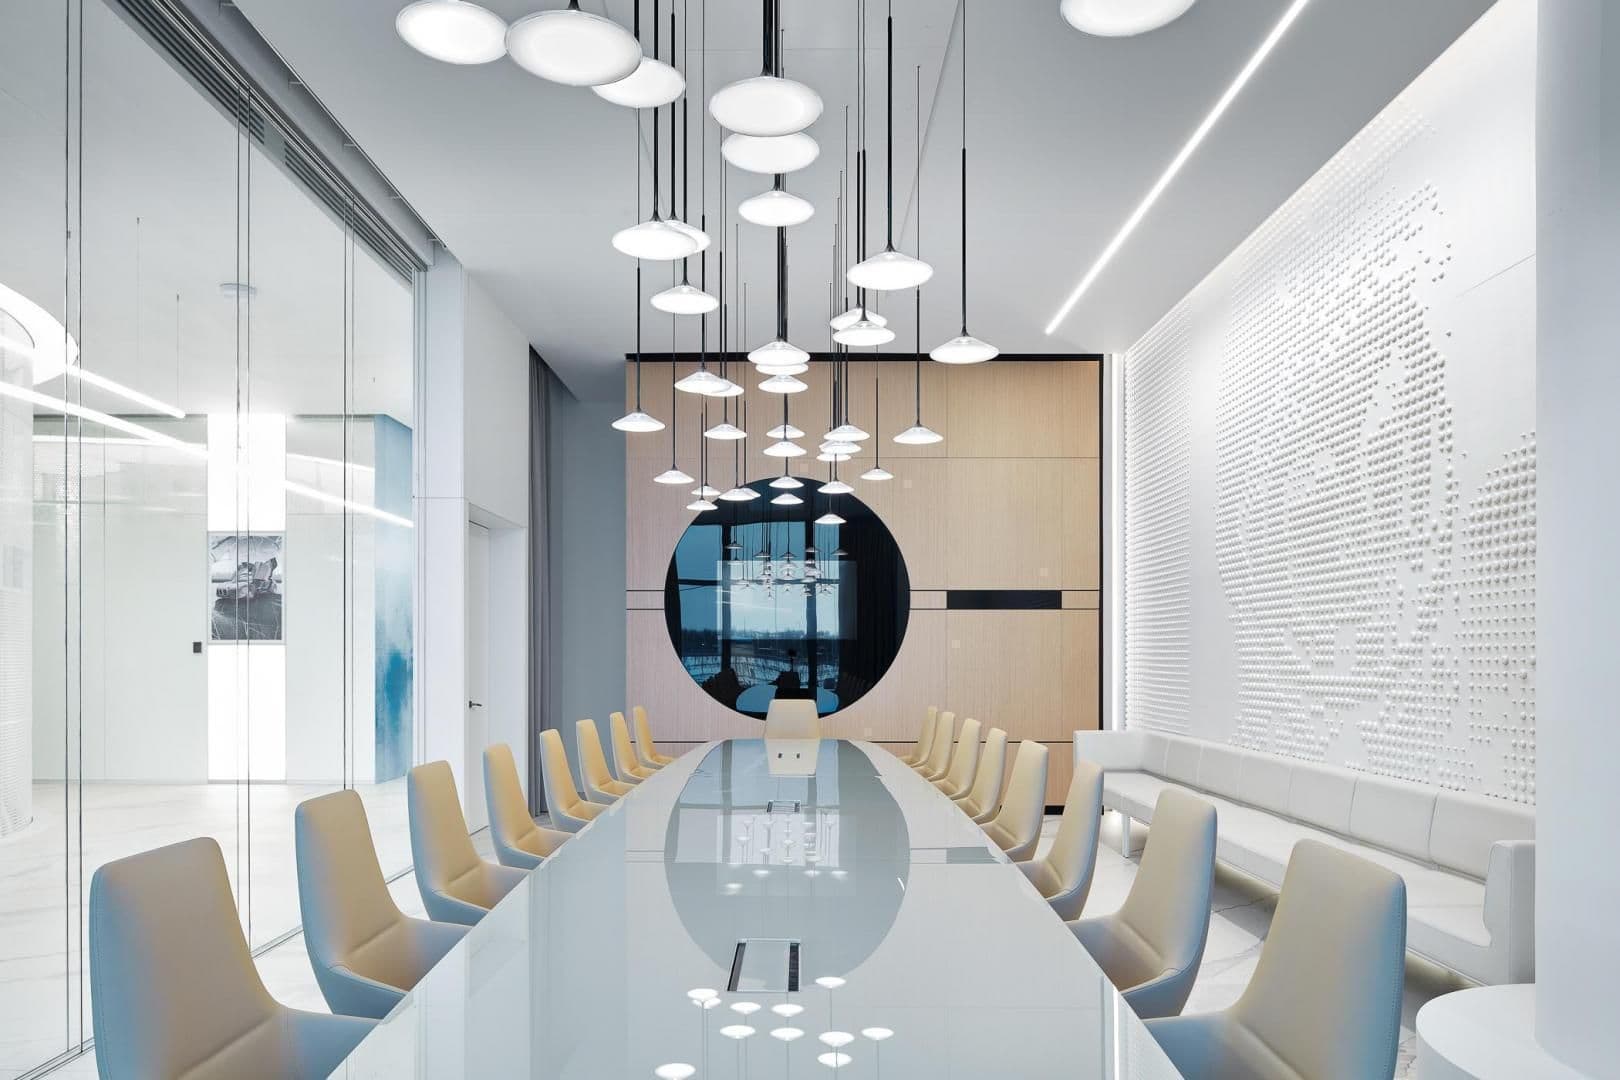 A conference room inside the new lounge features a relief of Gagarin's face, space-age pendant lights, and a shiny reflective tabletop. 